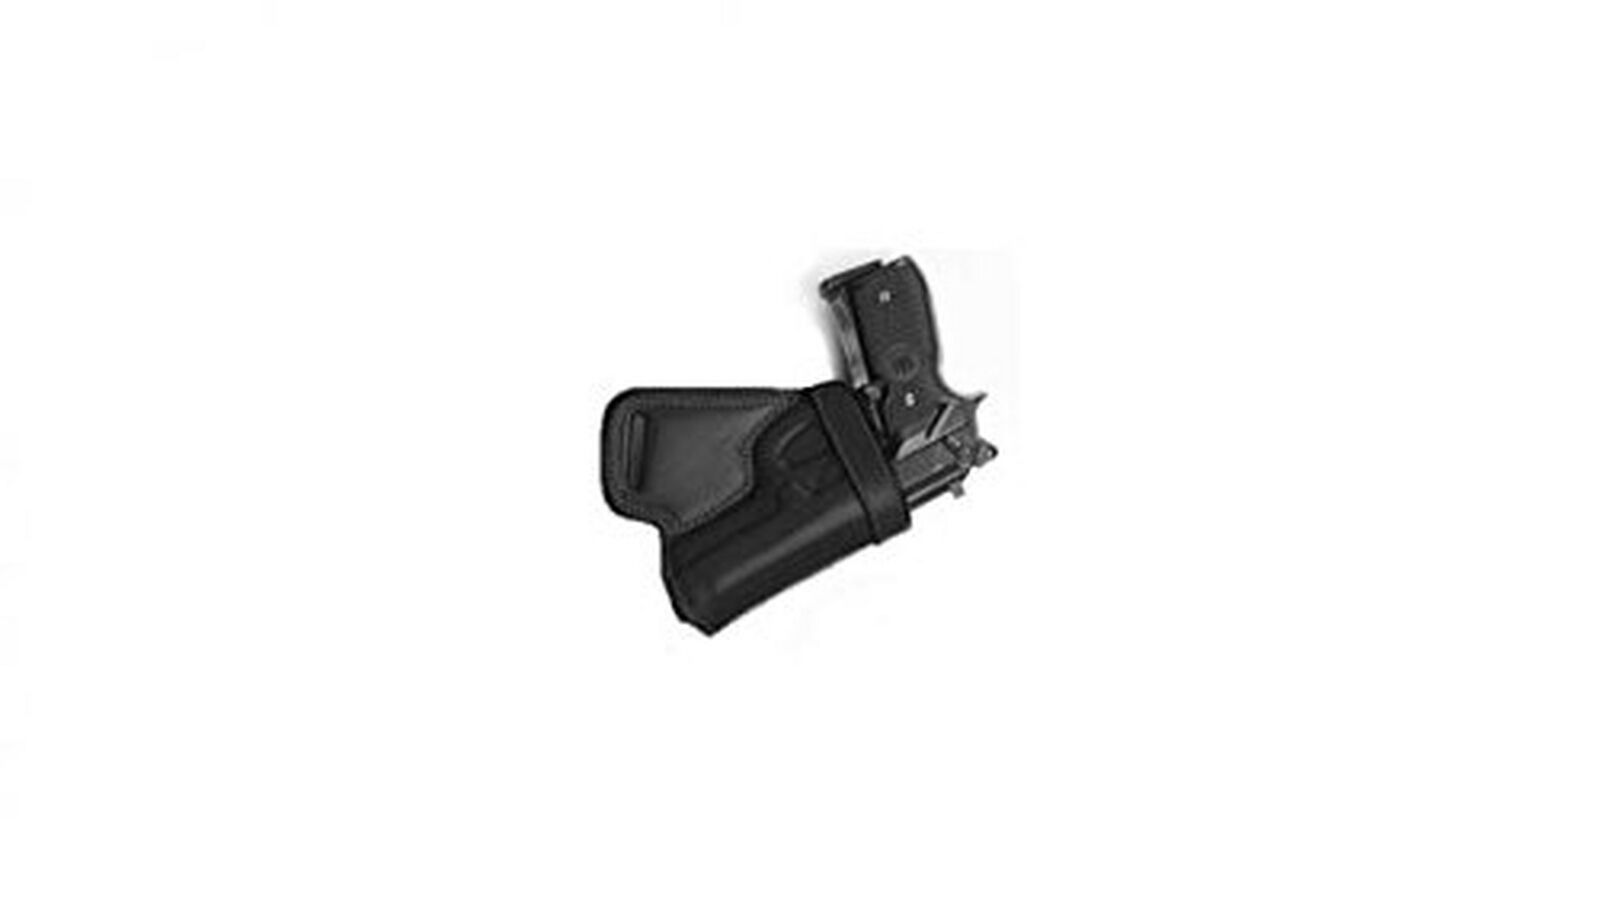 Cebeci 20894RB46 Right-Hand Leather Small of The Back (SoB) 20894 Holster Gun...